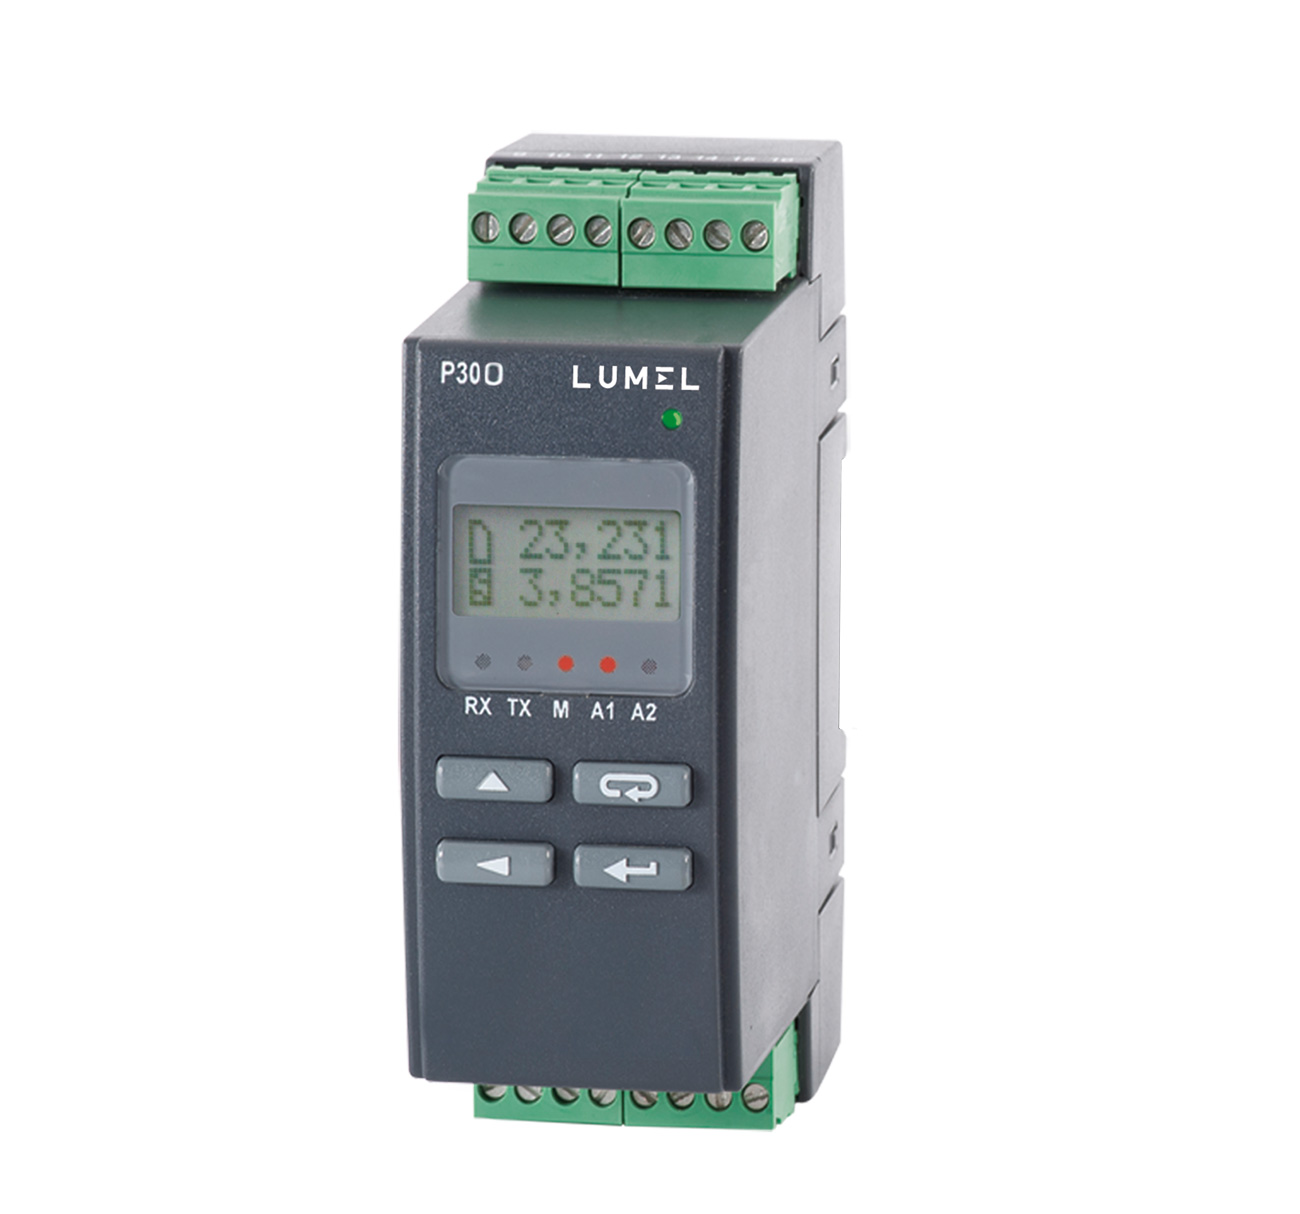 Transducer of pulses, frequency, turns, operation time with Ethernet